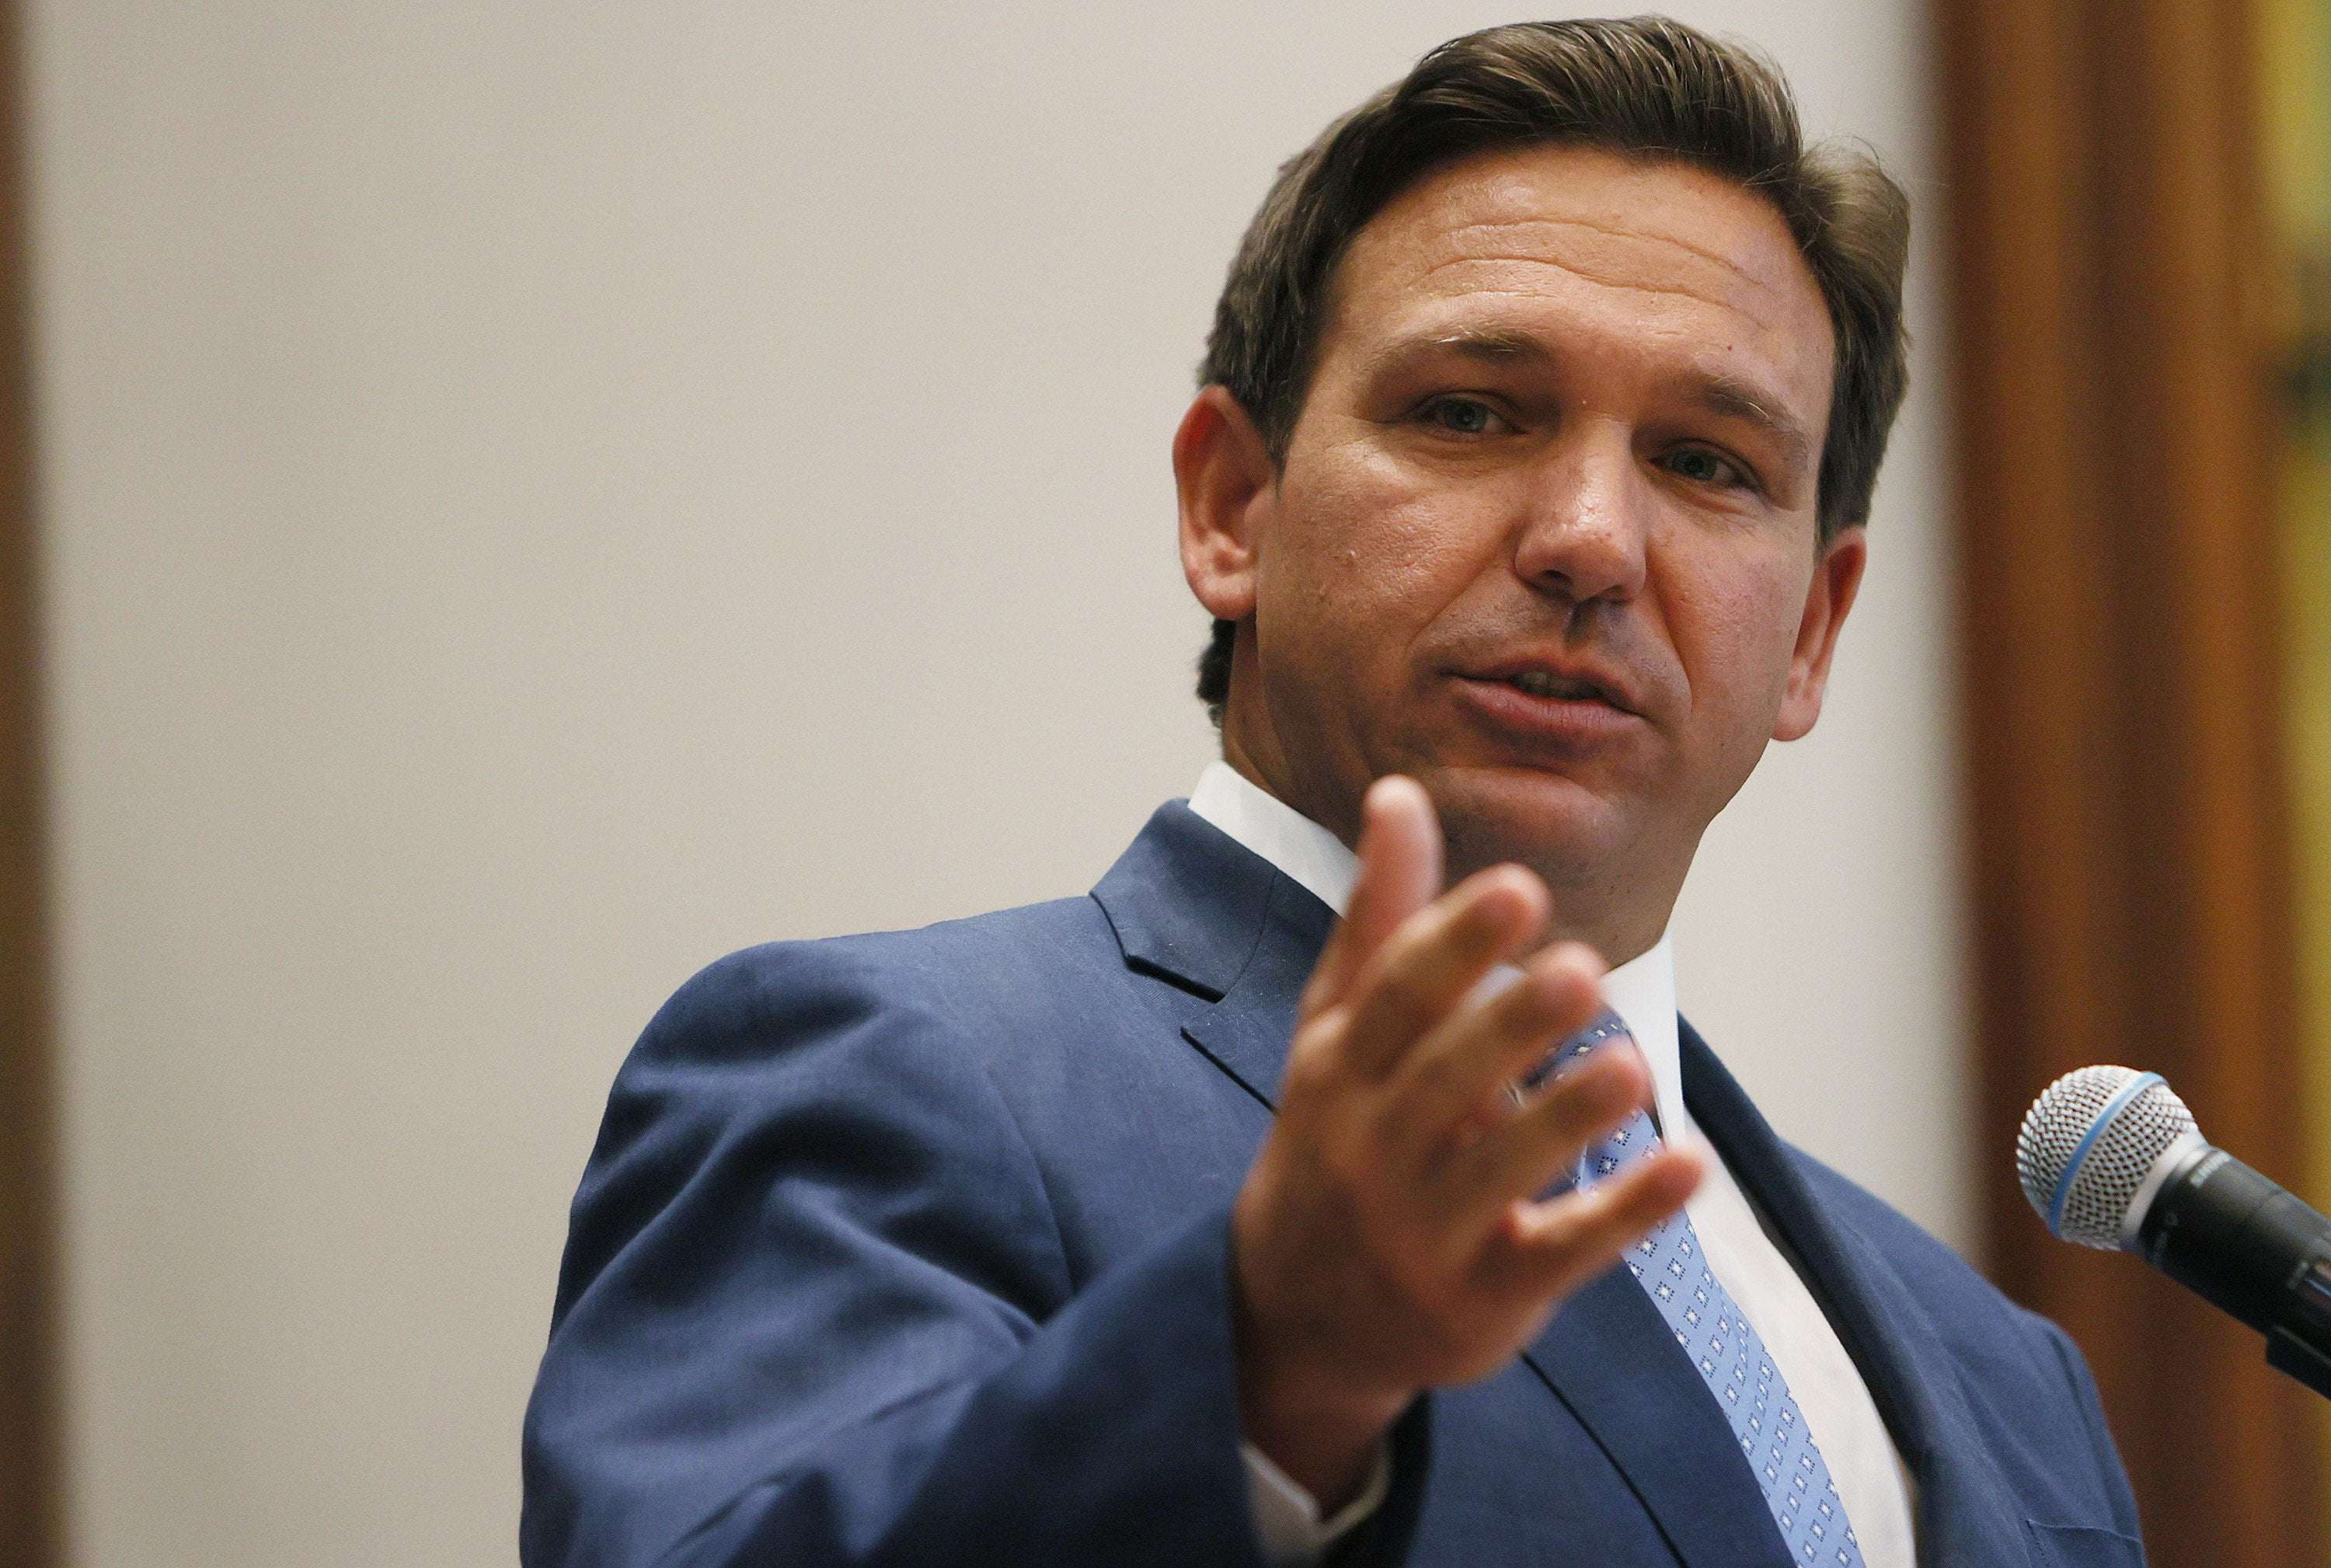 image for Ron DeSantis Out of Breath in Video Prompts COVID Speculation